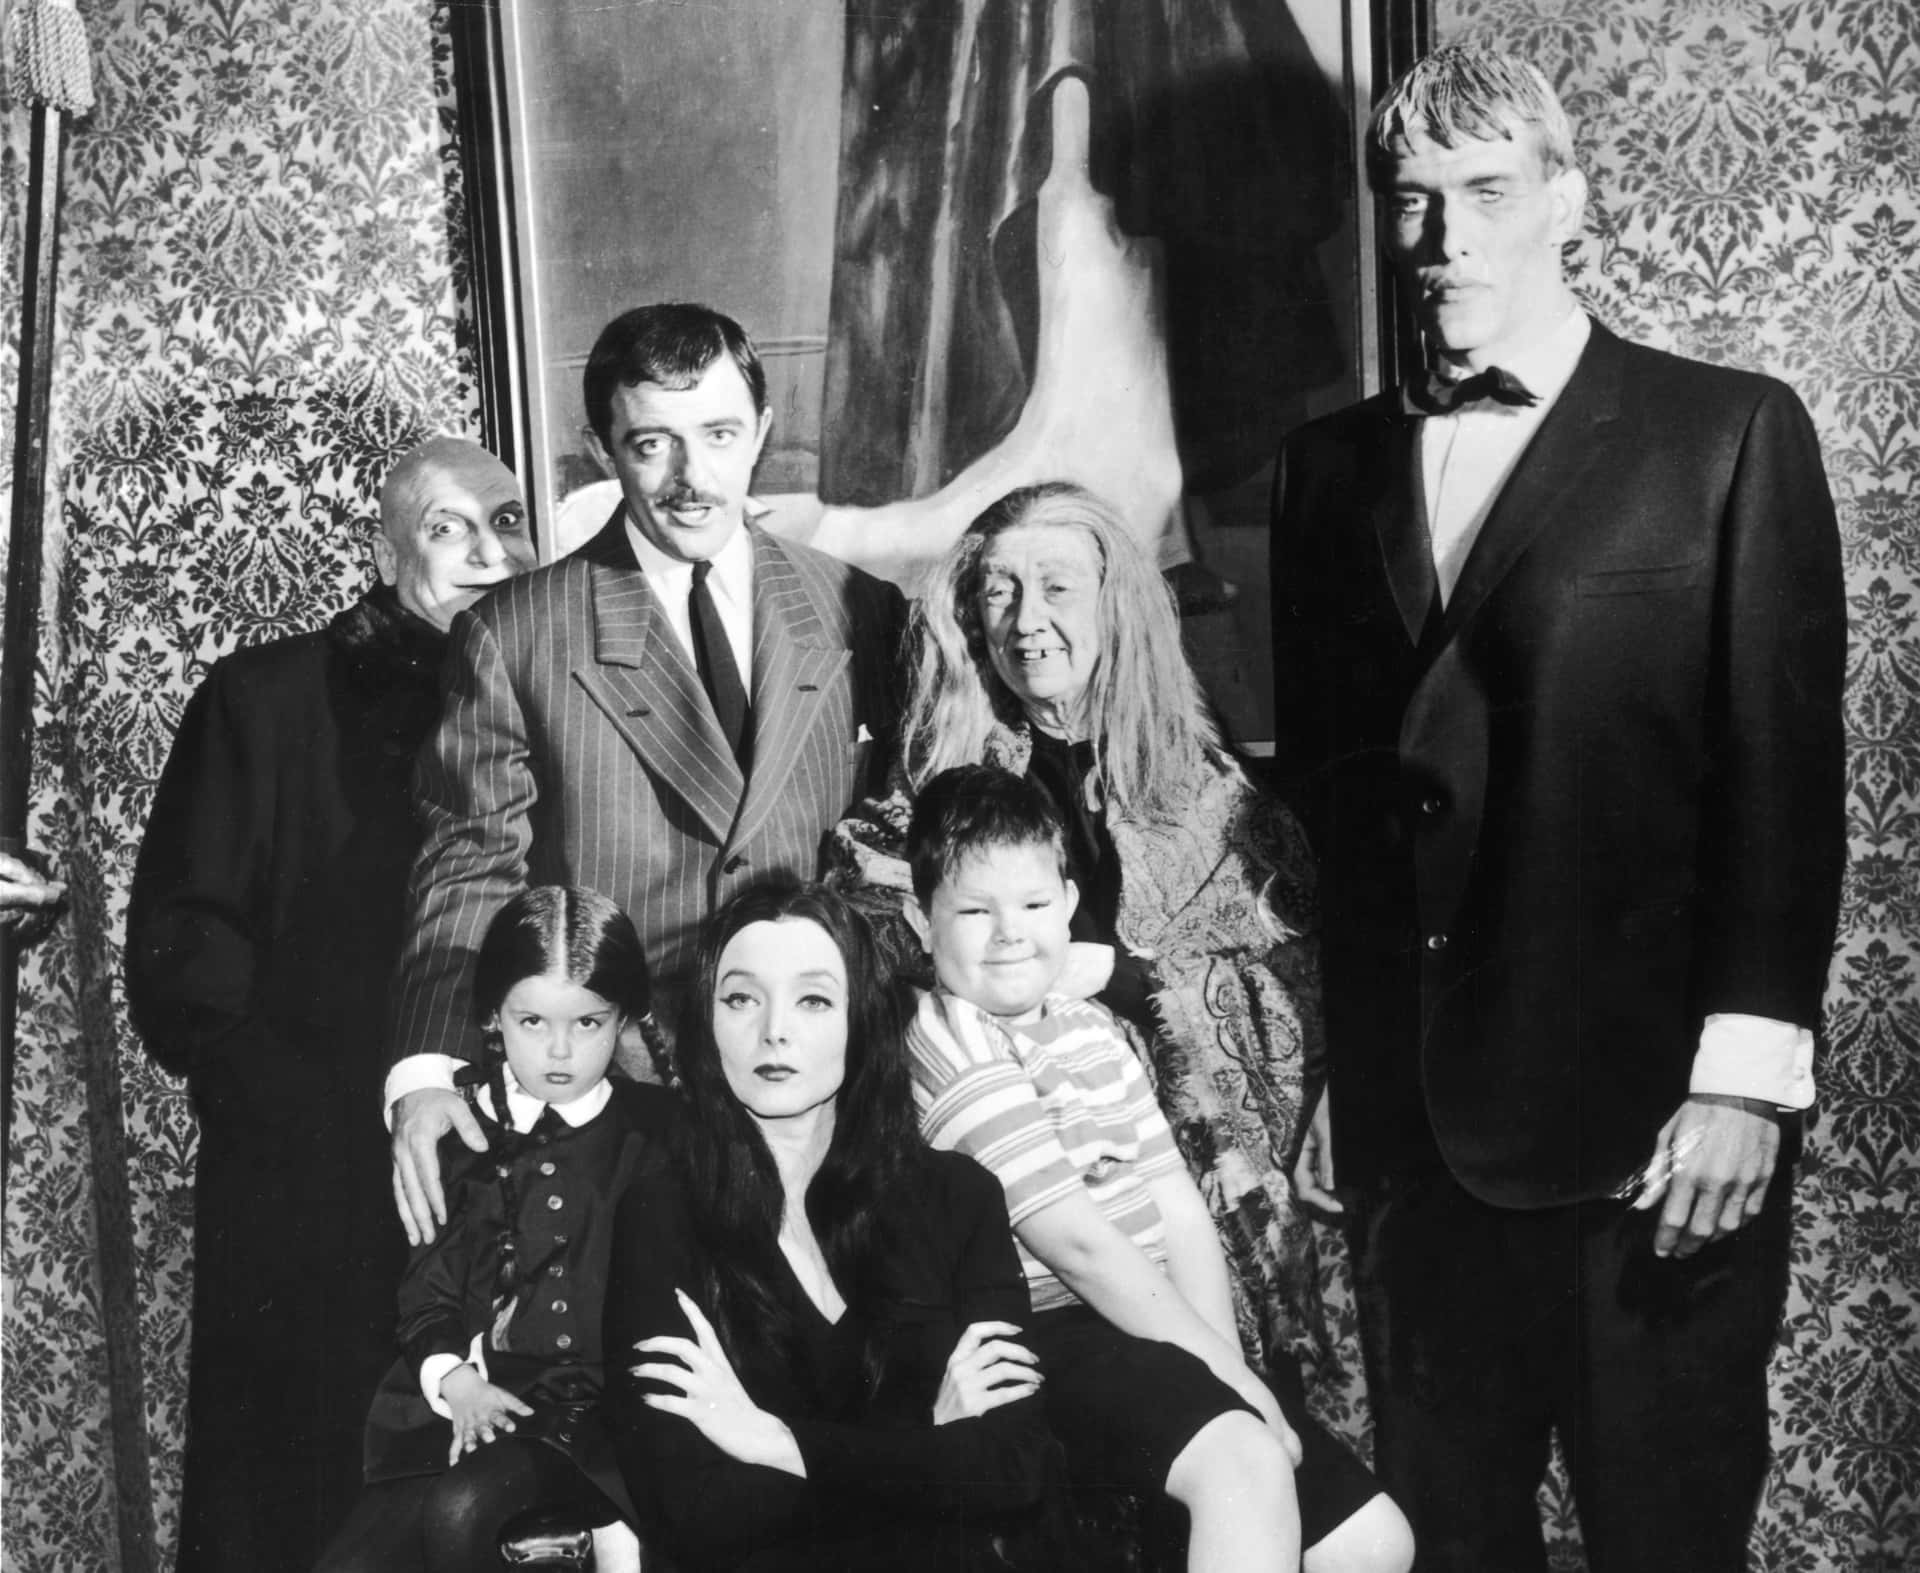 The Addams Family In A Black And White Photo